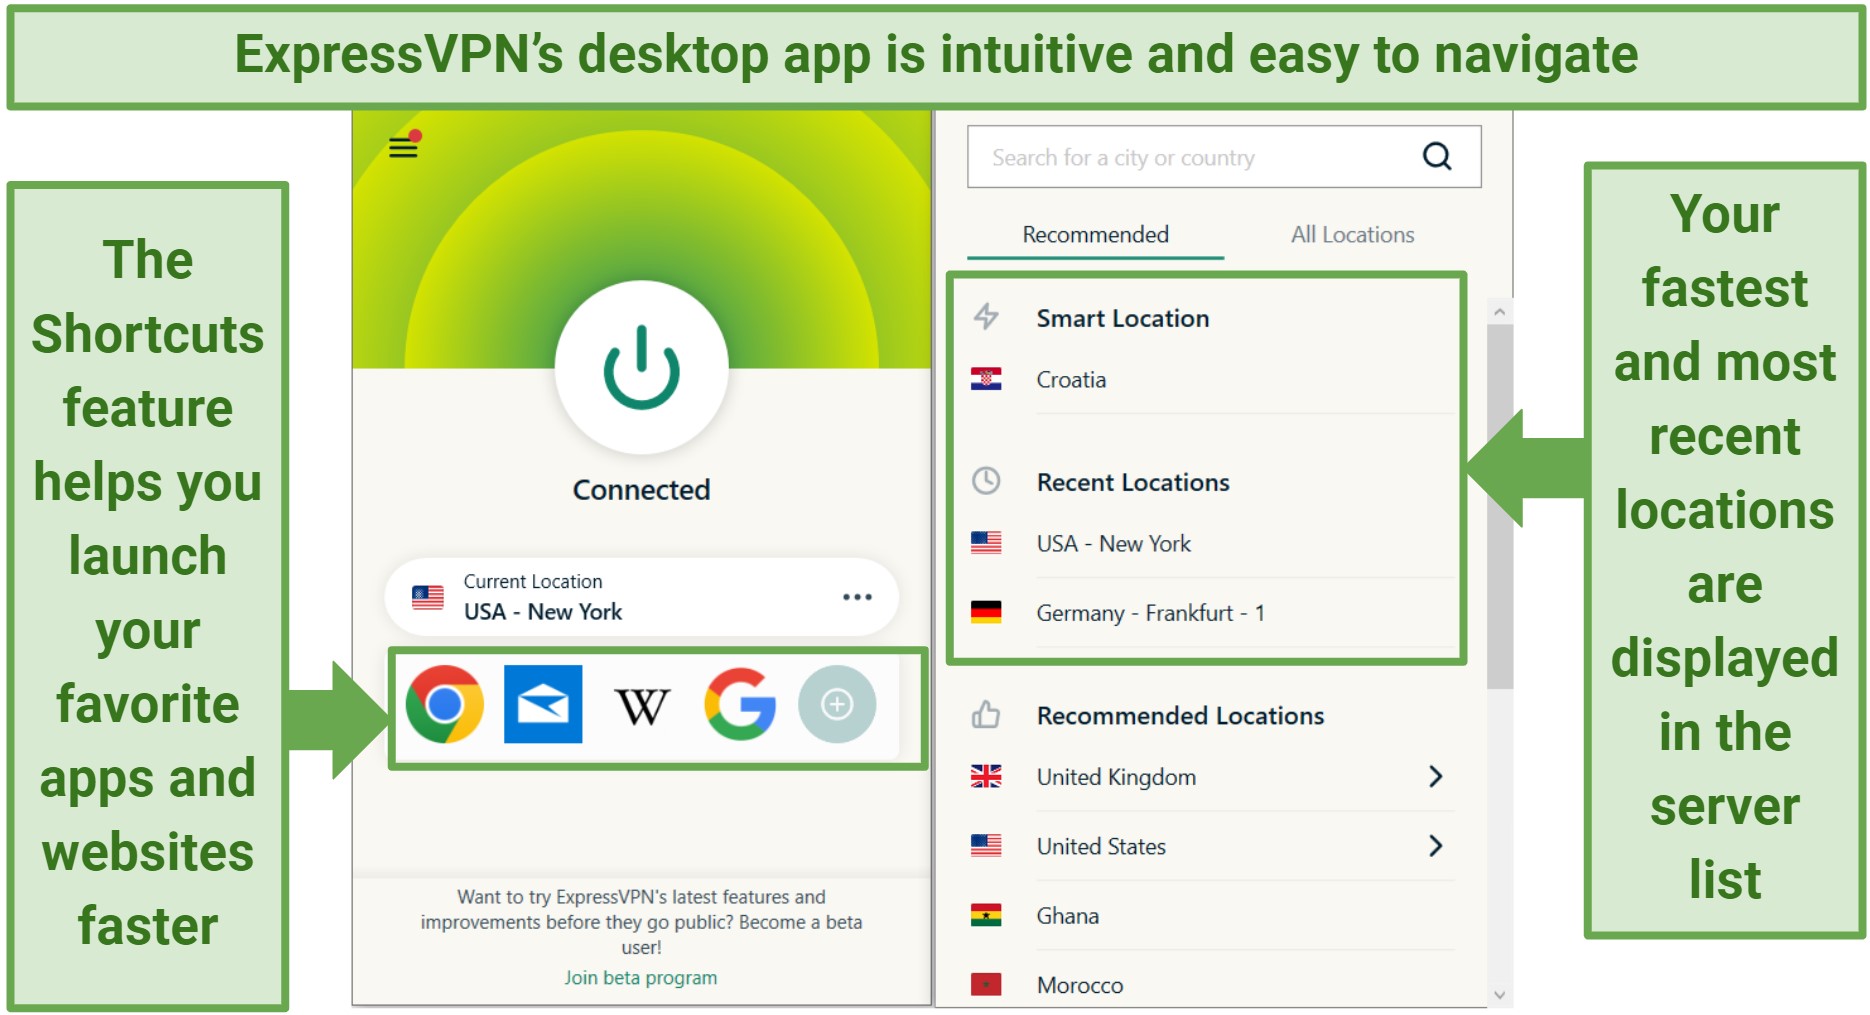 Screenshot of ExpressVPN's desktop app showing its Shortcuts feature and the Smart Location features